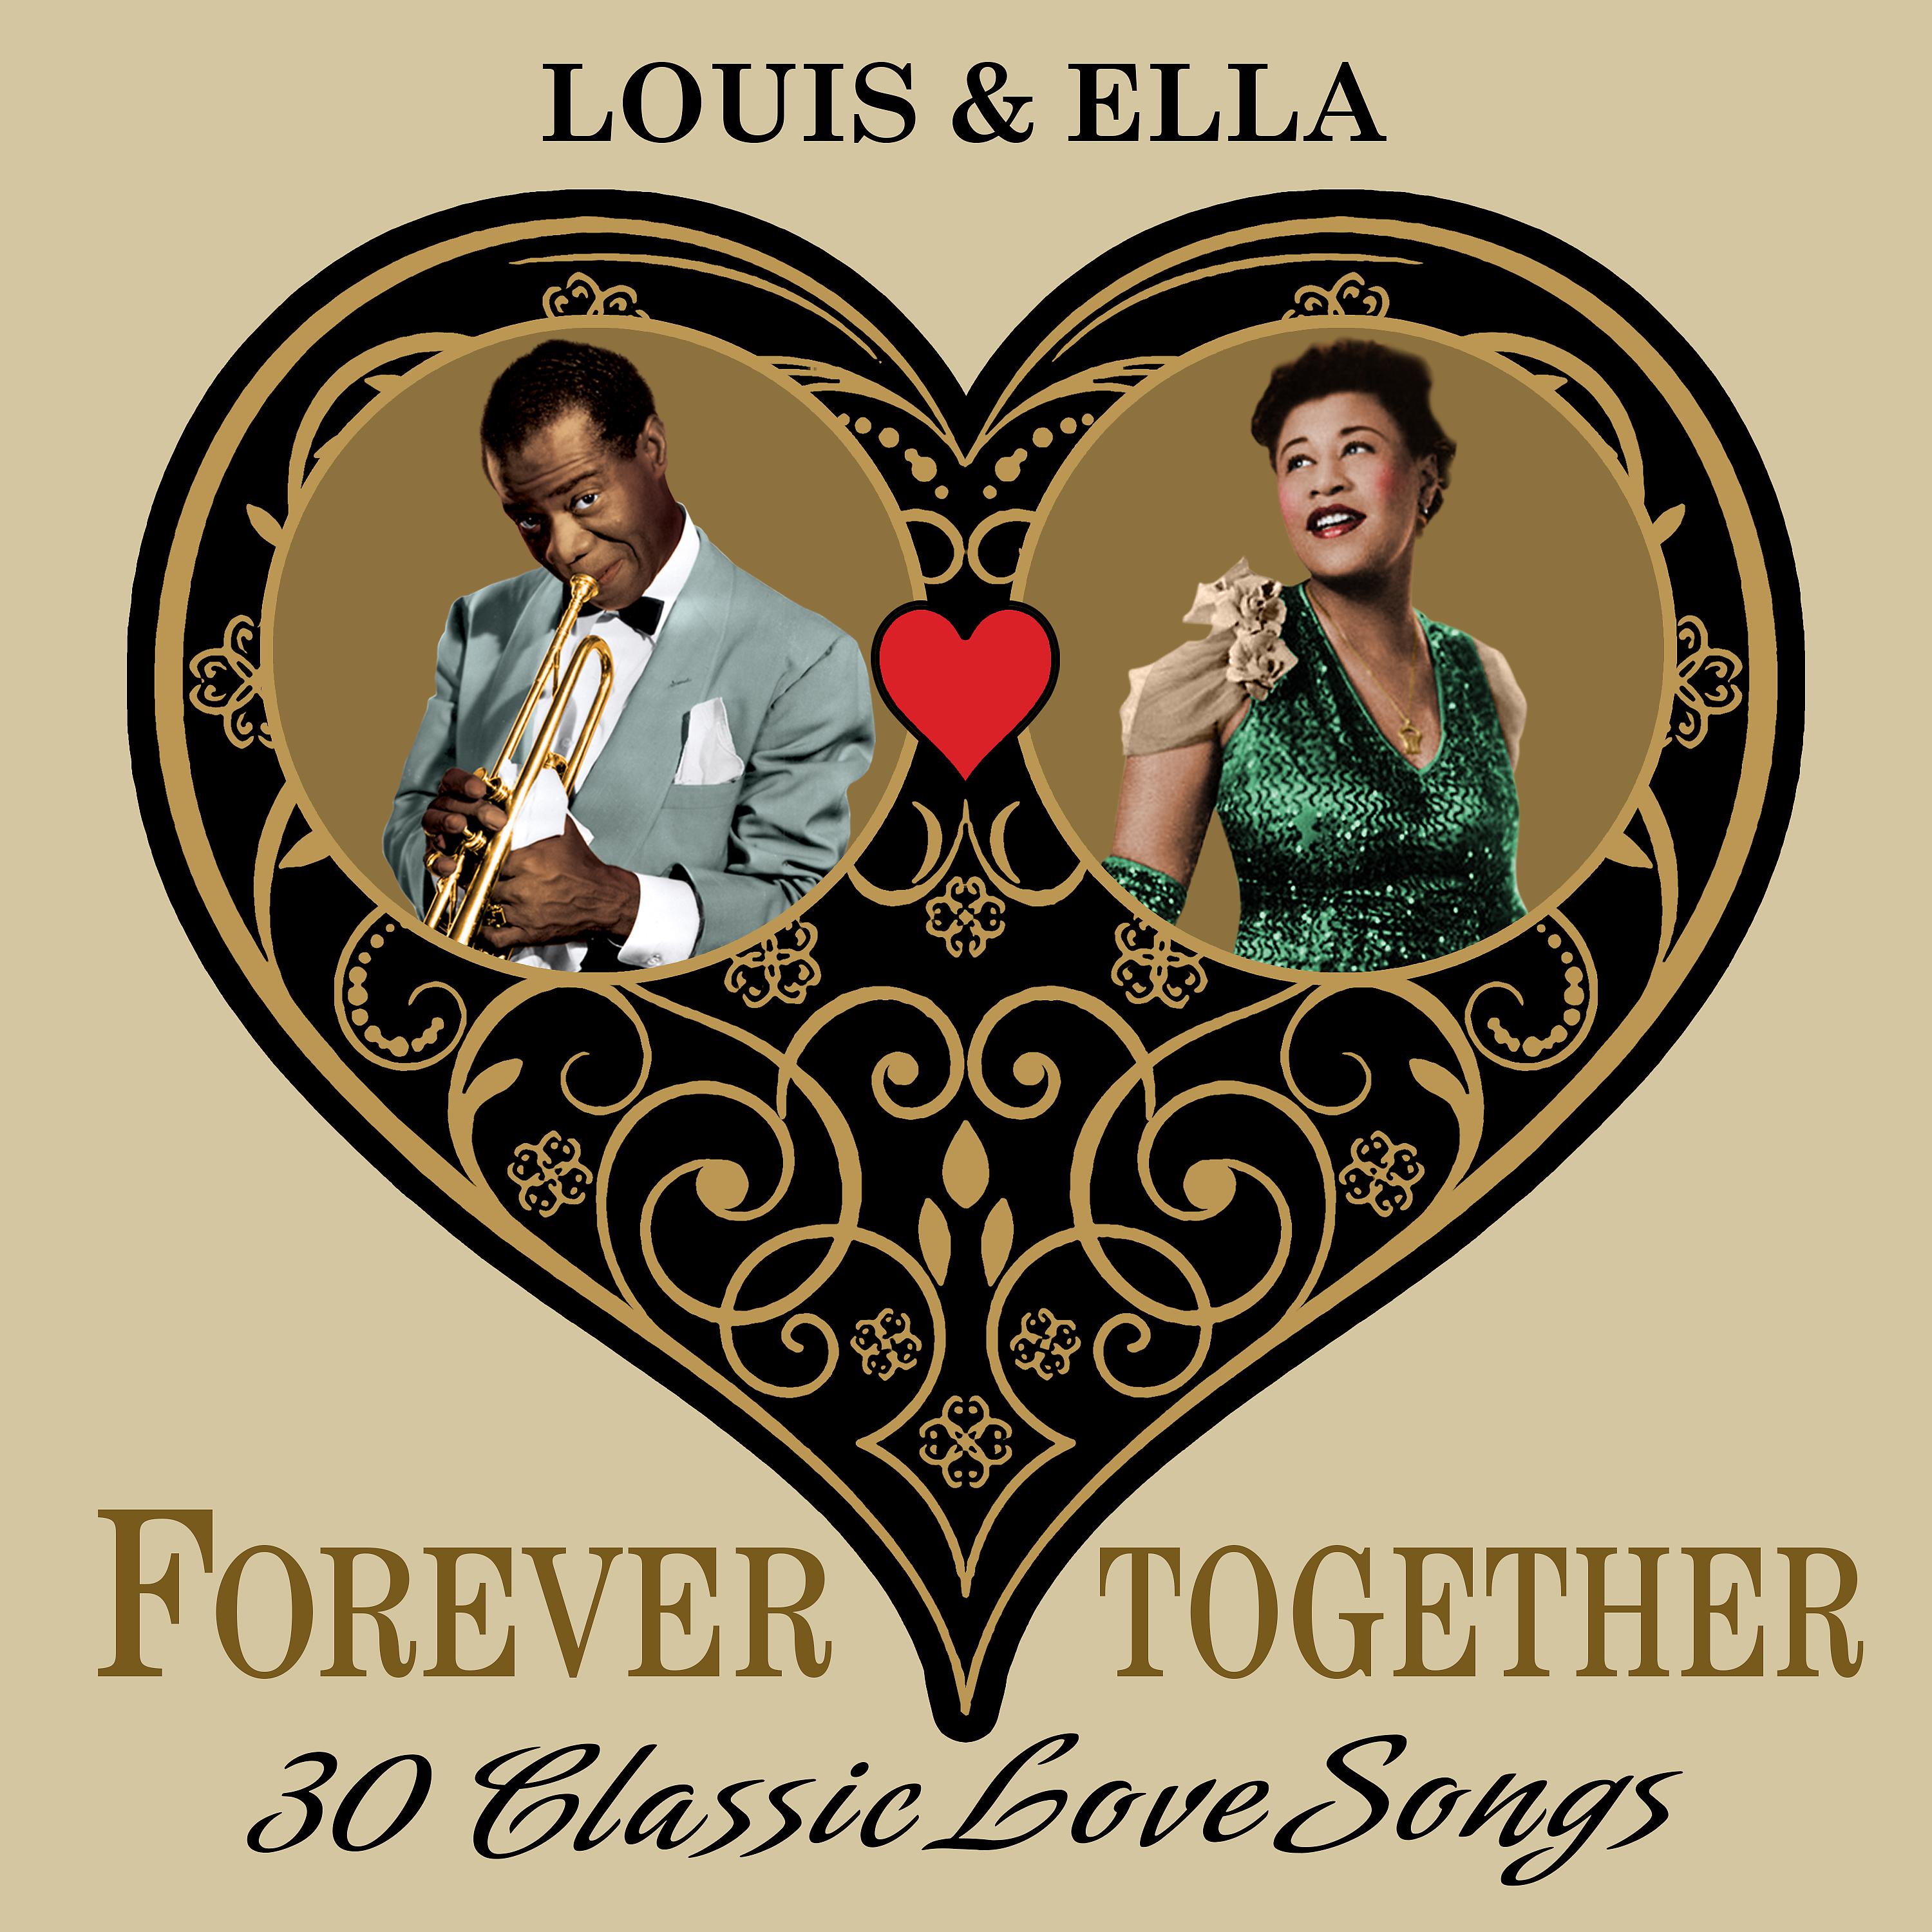 Постер альбома Louis & Ella (Forever Together) 30 Classic Love Songs